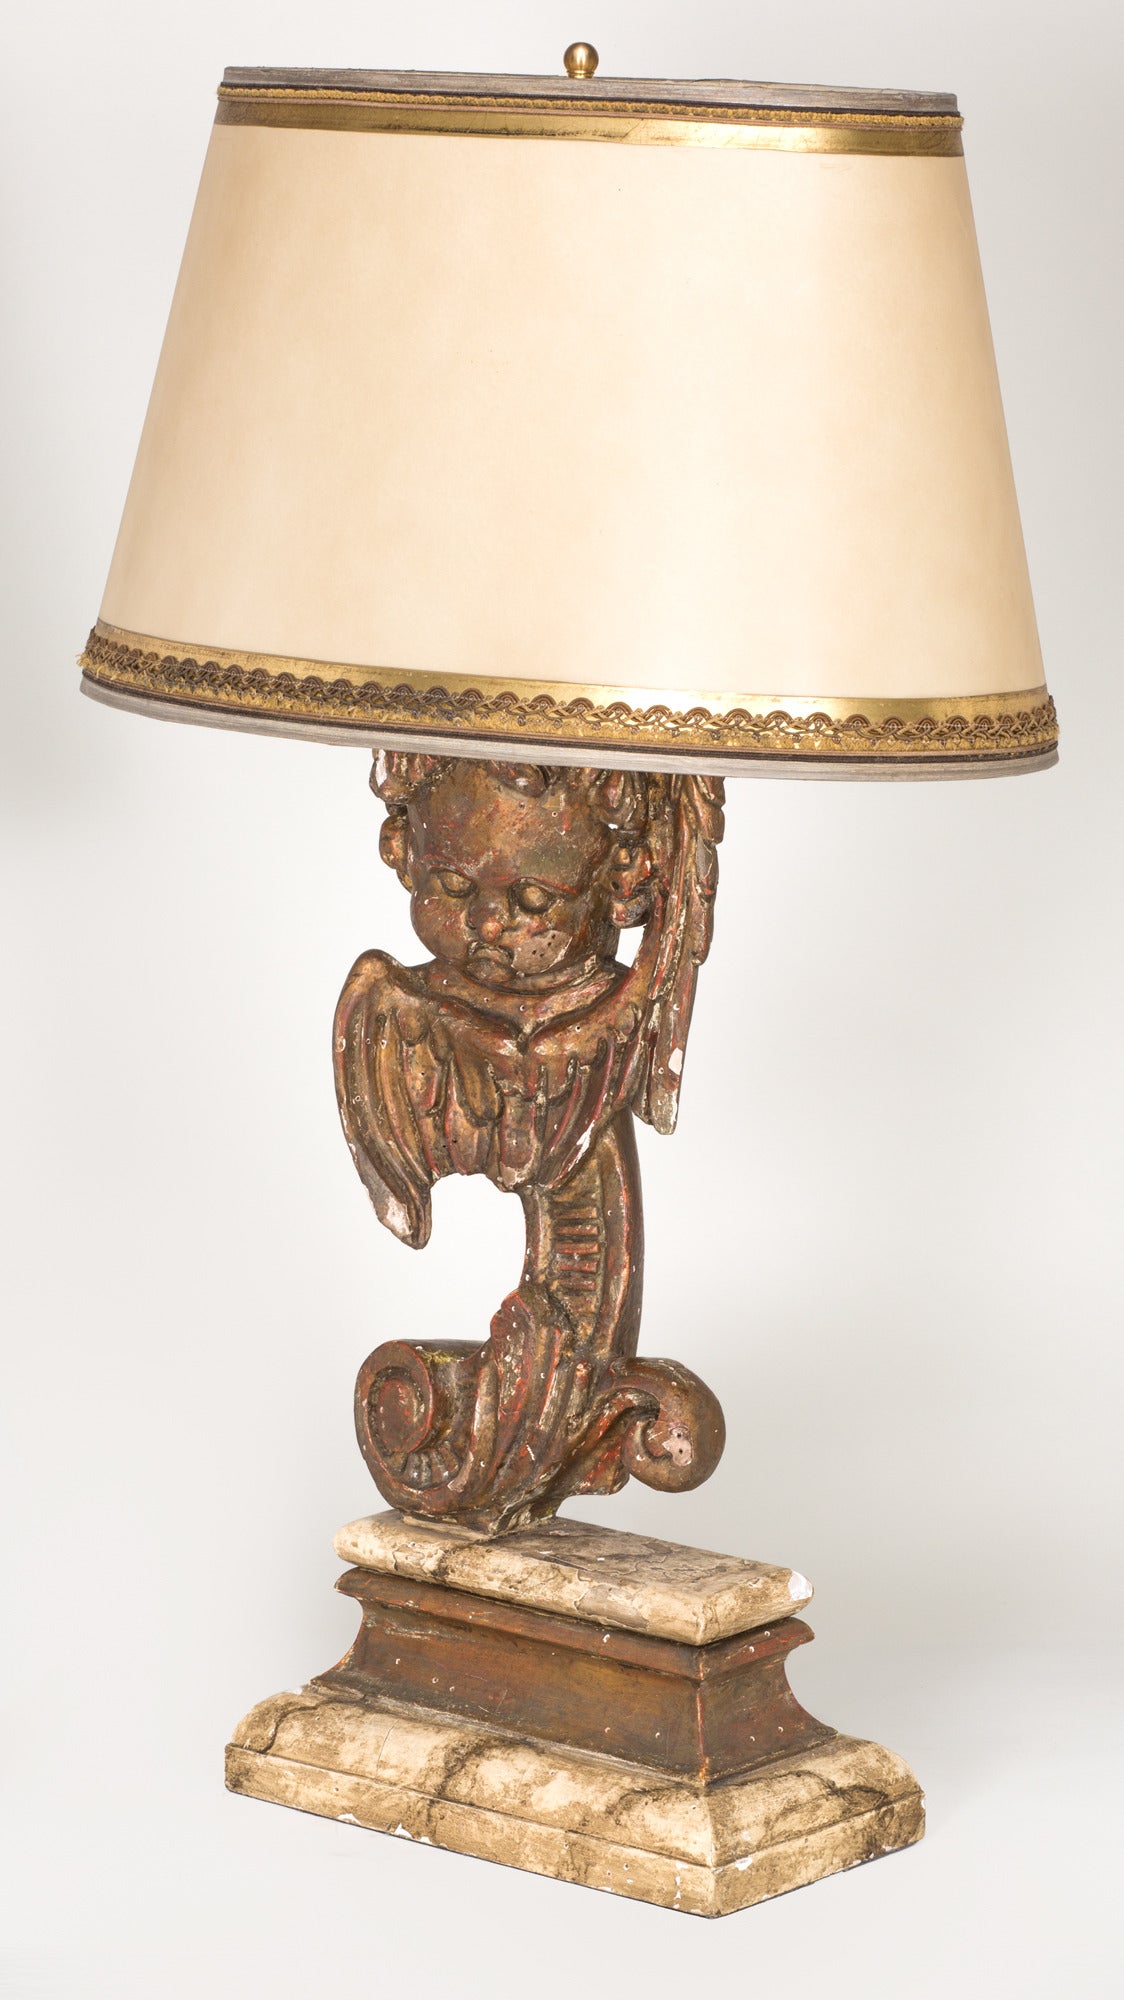 Pair of lamps carved giltwood of cherub elements, circa 1860s. Plinth stand is painted faux marble. Handmade parchment gilt trim shade. 13 D x 19 W x 11 H. Lamp without shade dimensions are shown below.